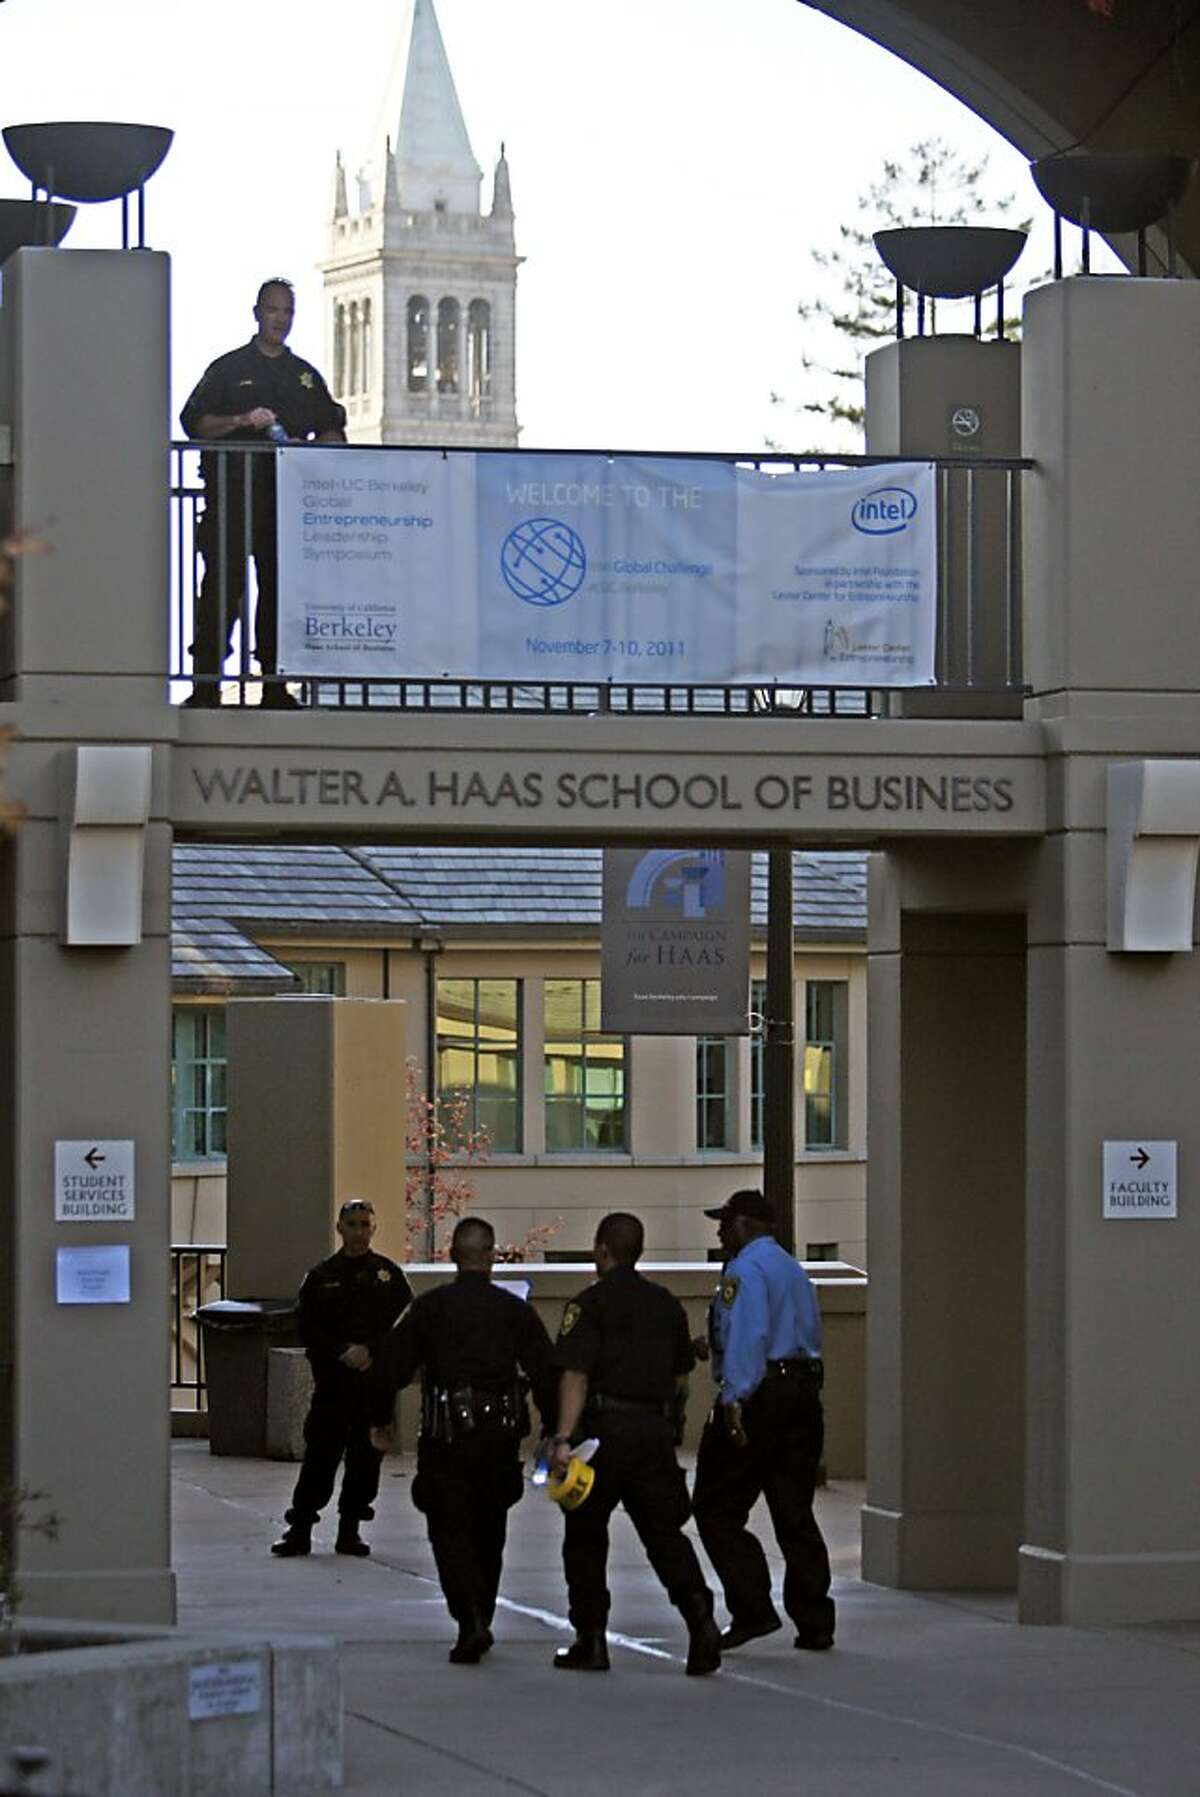 Police maintain the perimeter at the east entrance to the Haas School of Business where a shooting happened involving police and an armed suspect at UC Berkeley in Berkeley, Calif. on Tuesday Nov. 15, 2011.